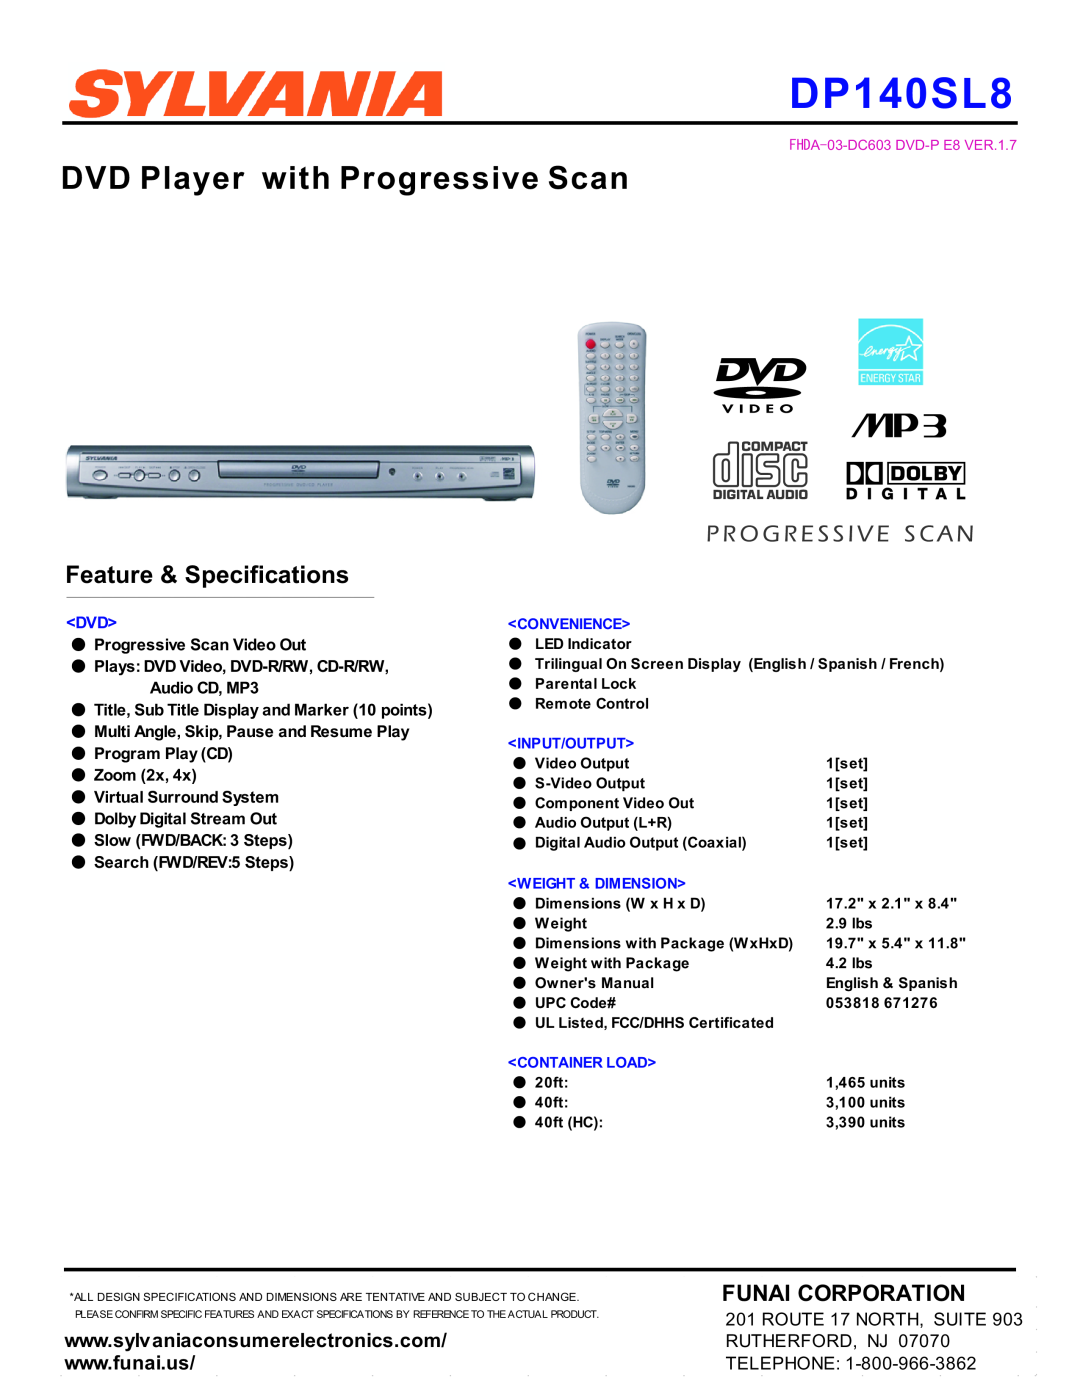 Sylvania DP140SL8 specifications DVD Player with Progressive Scan, Feature & Specifications, Funai Corporation, Telephone 